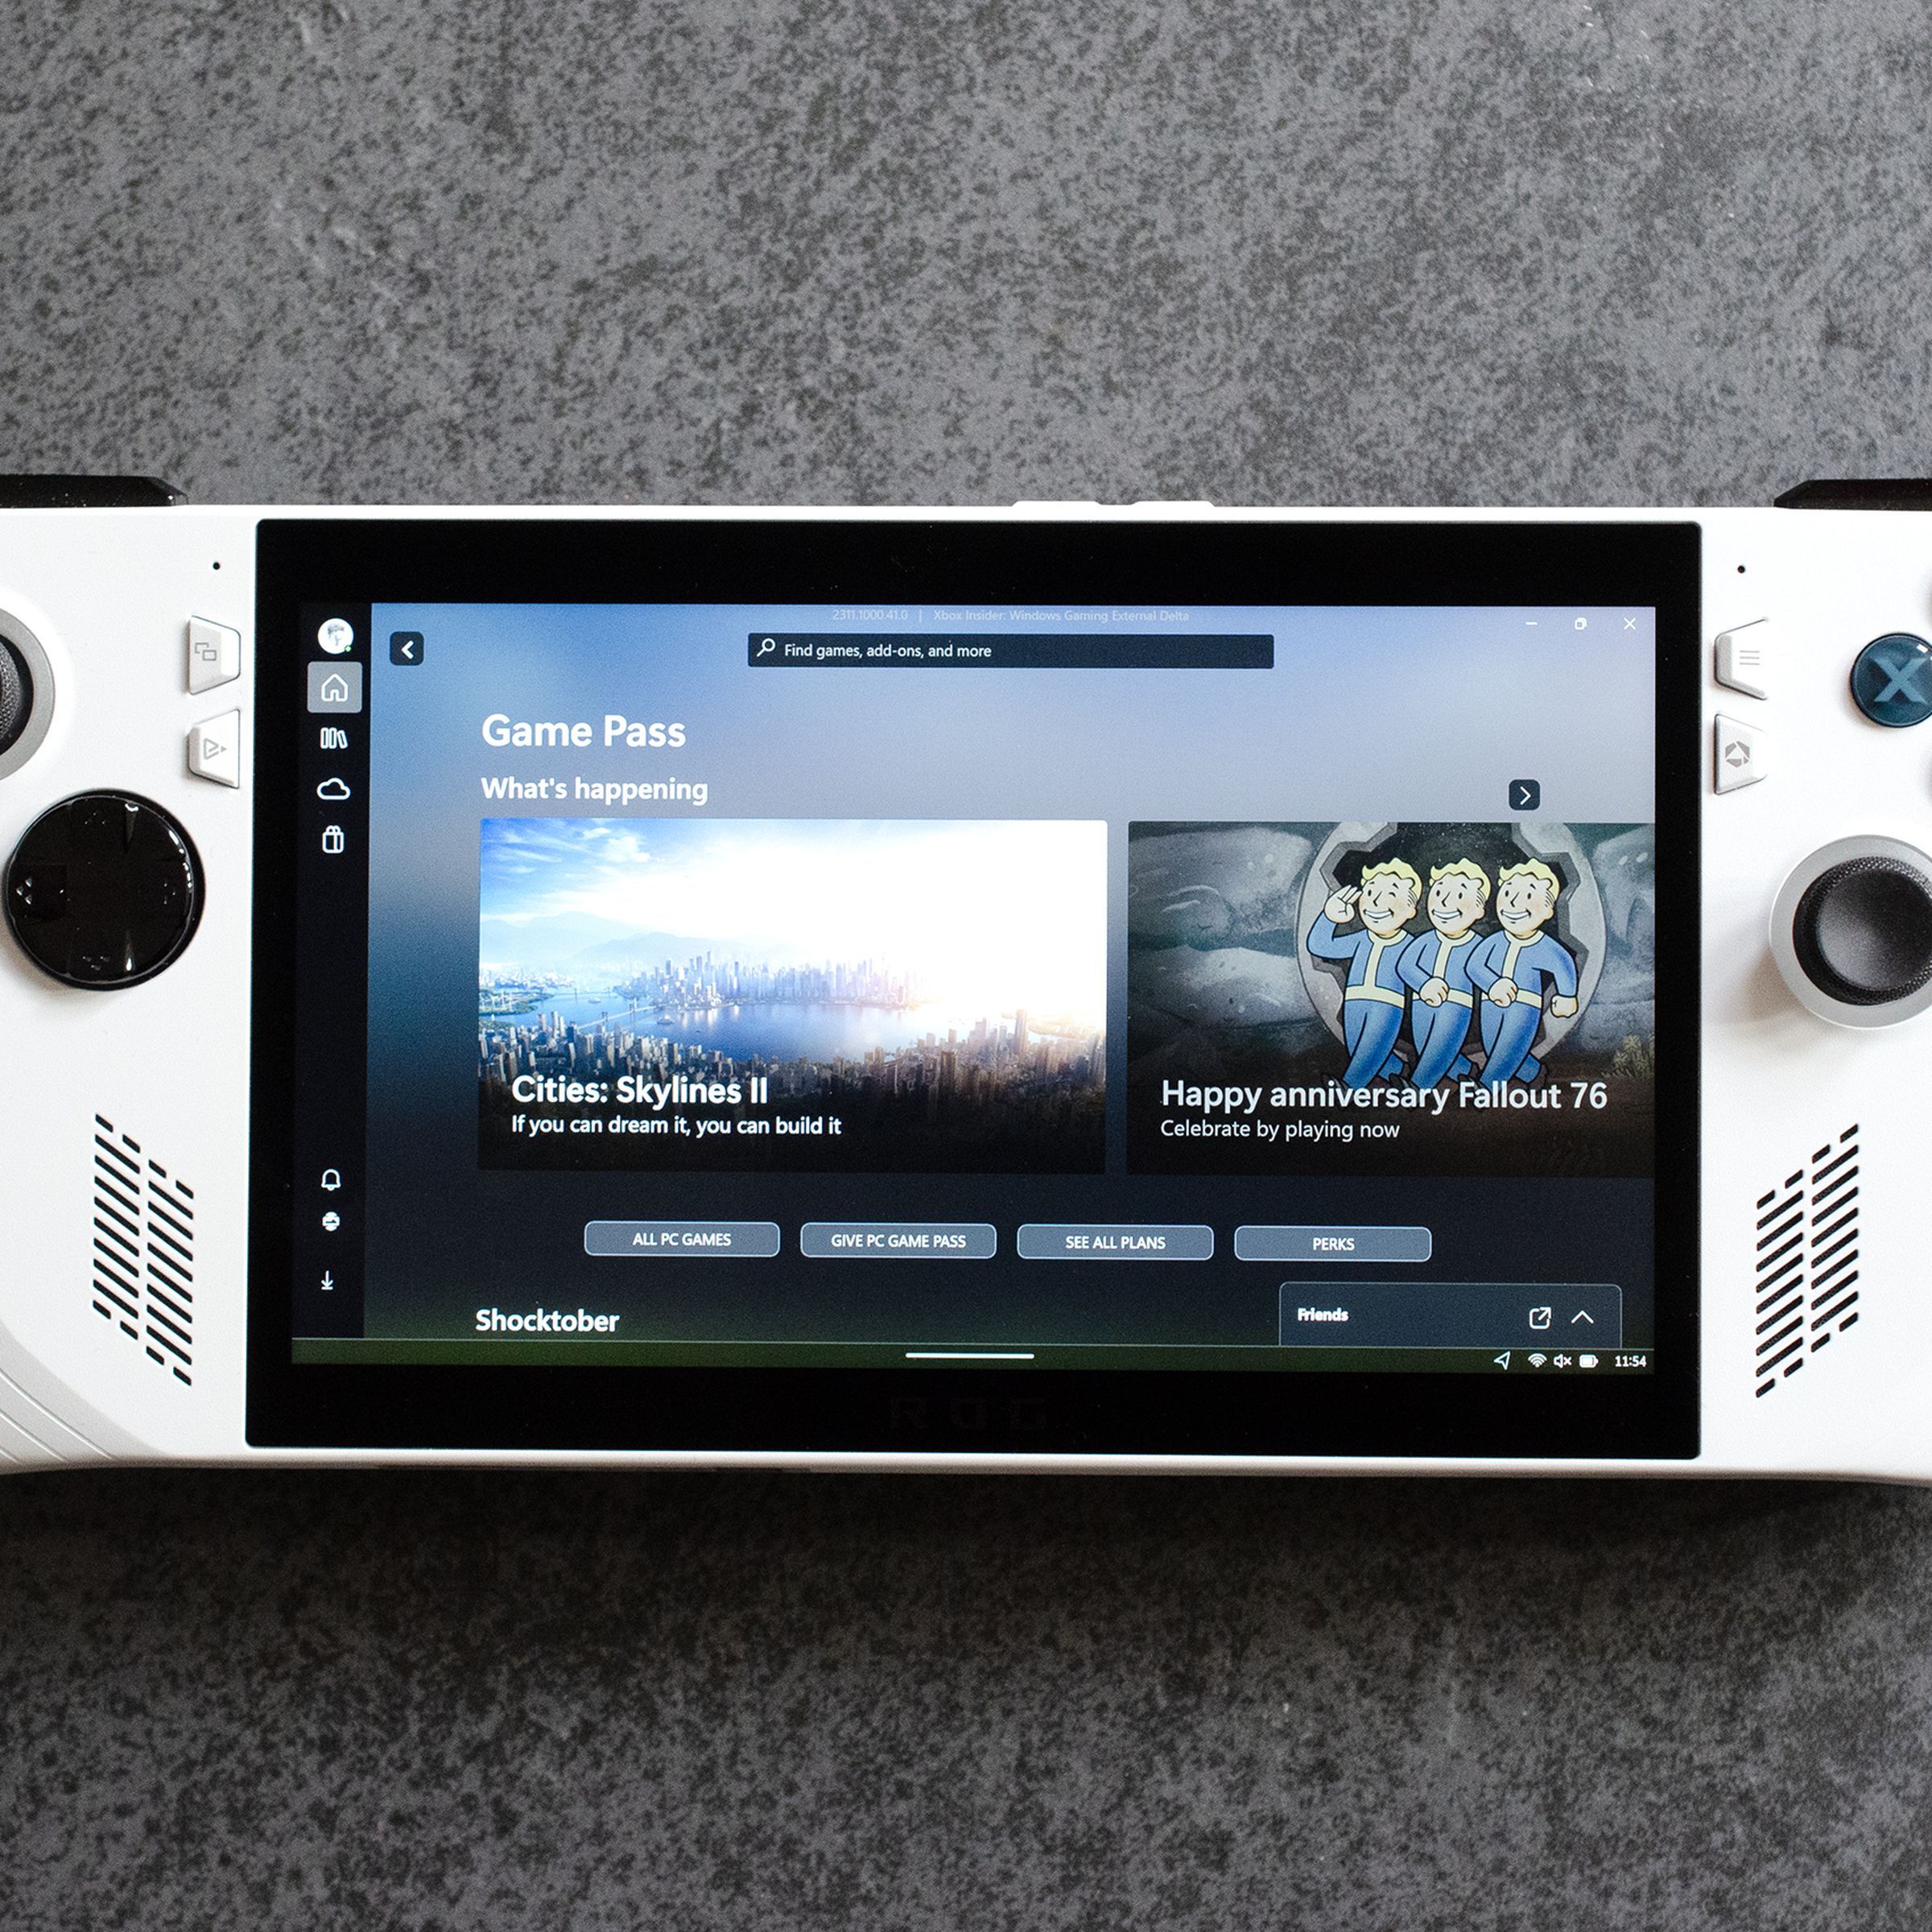 An Asus ROG Ally handheld running the Xbox app